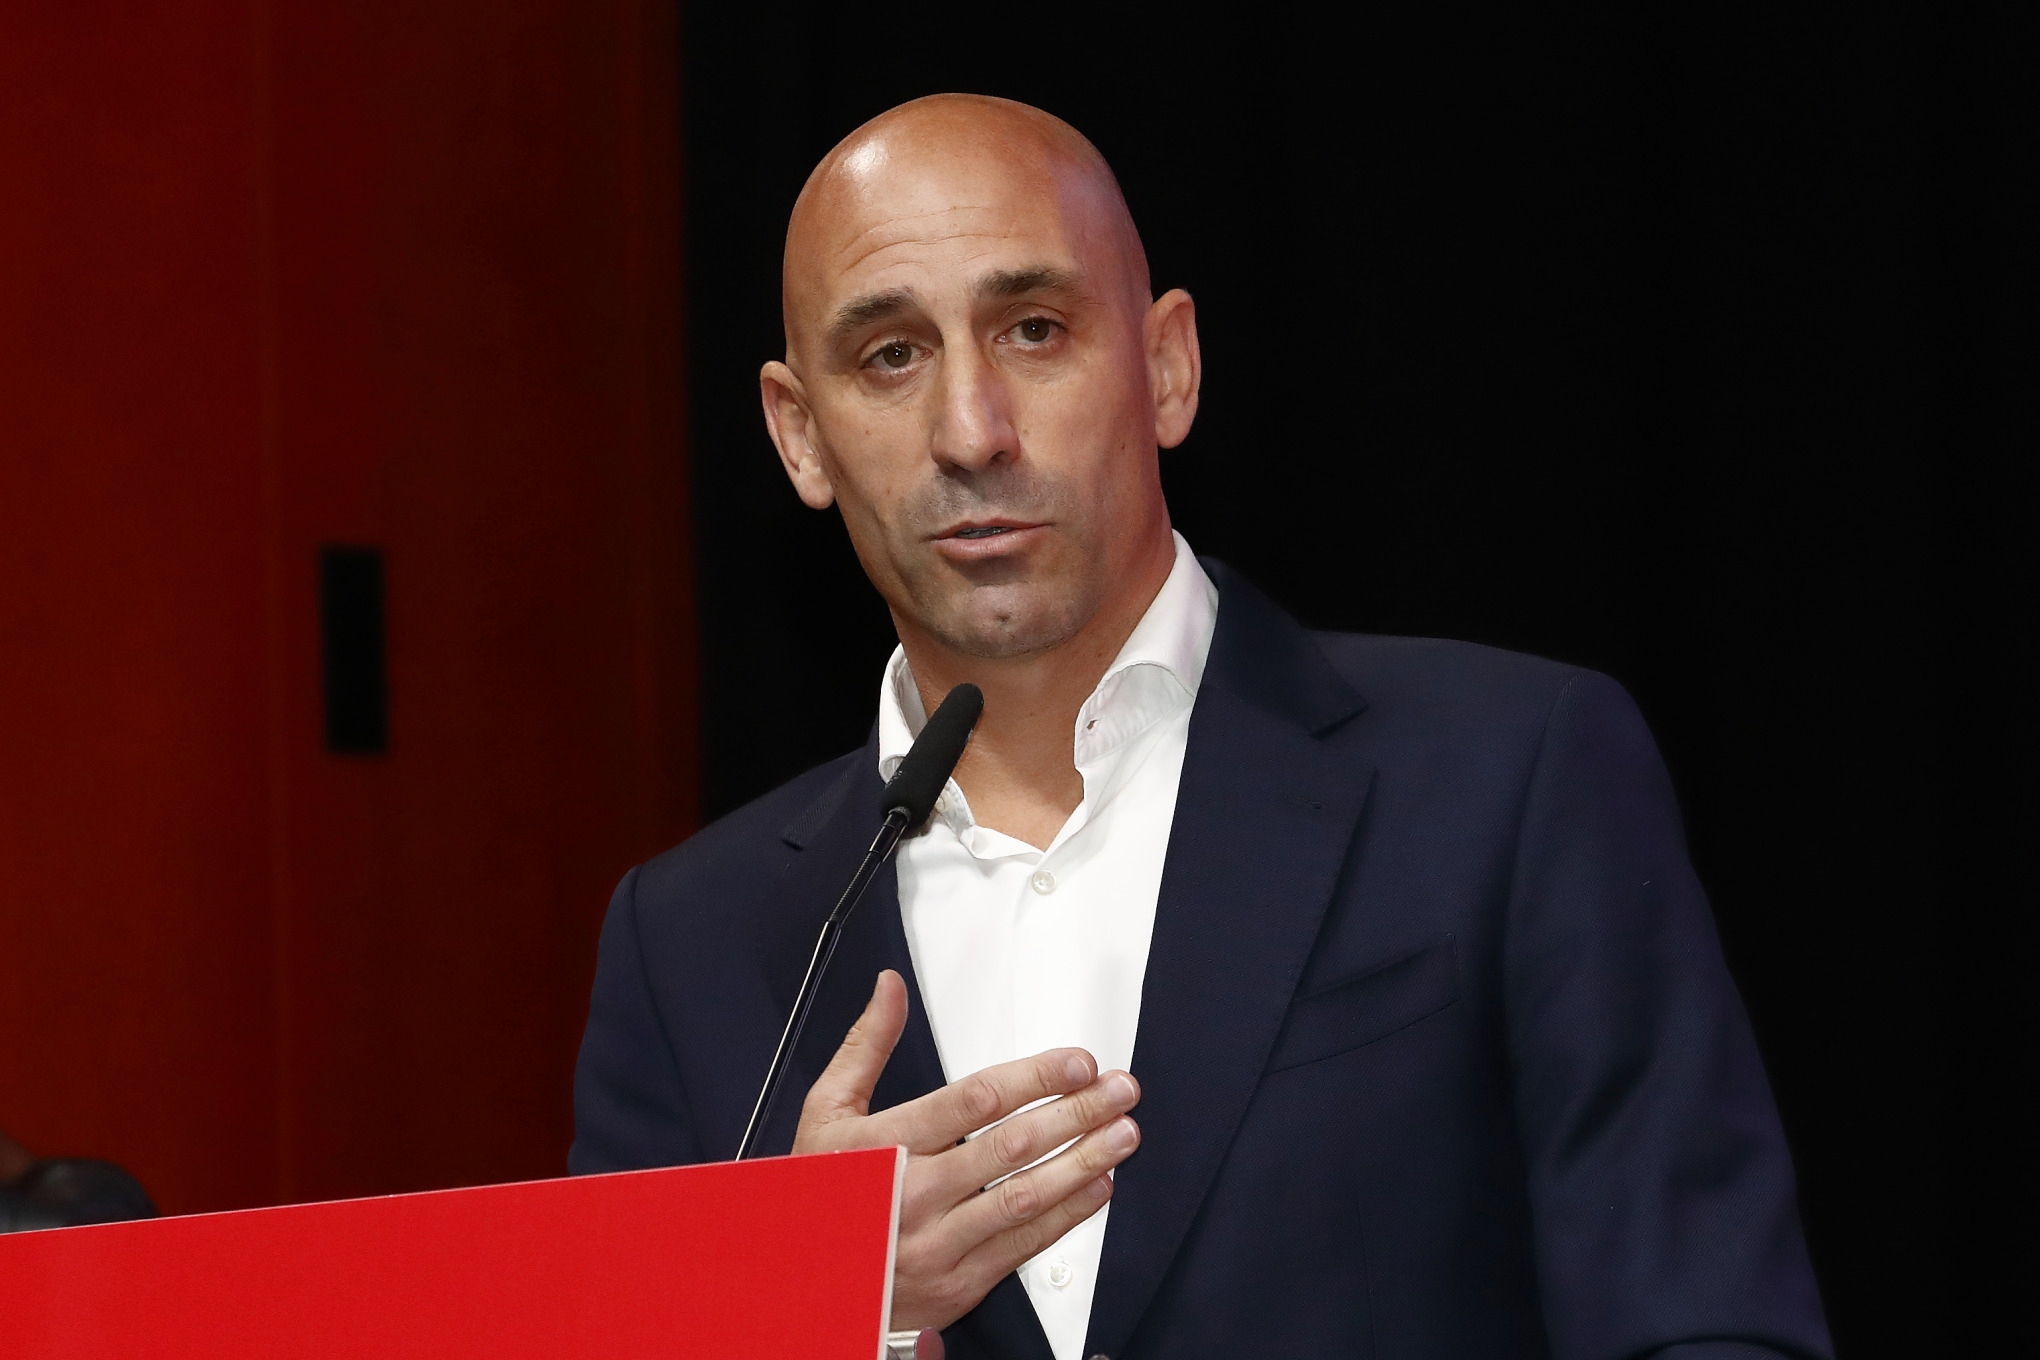 Rubiales resigns as Spains soccer president 3 weeks after kissing player at Womens World Cup final image